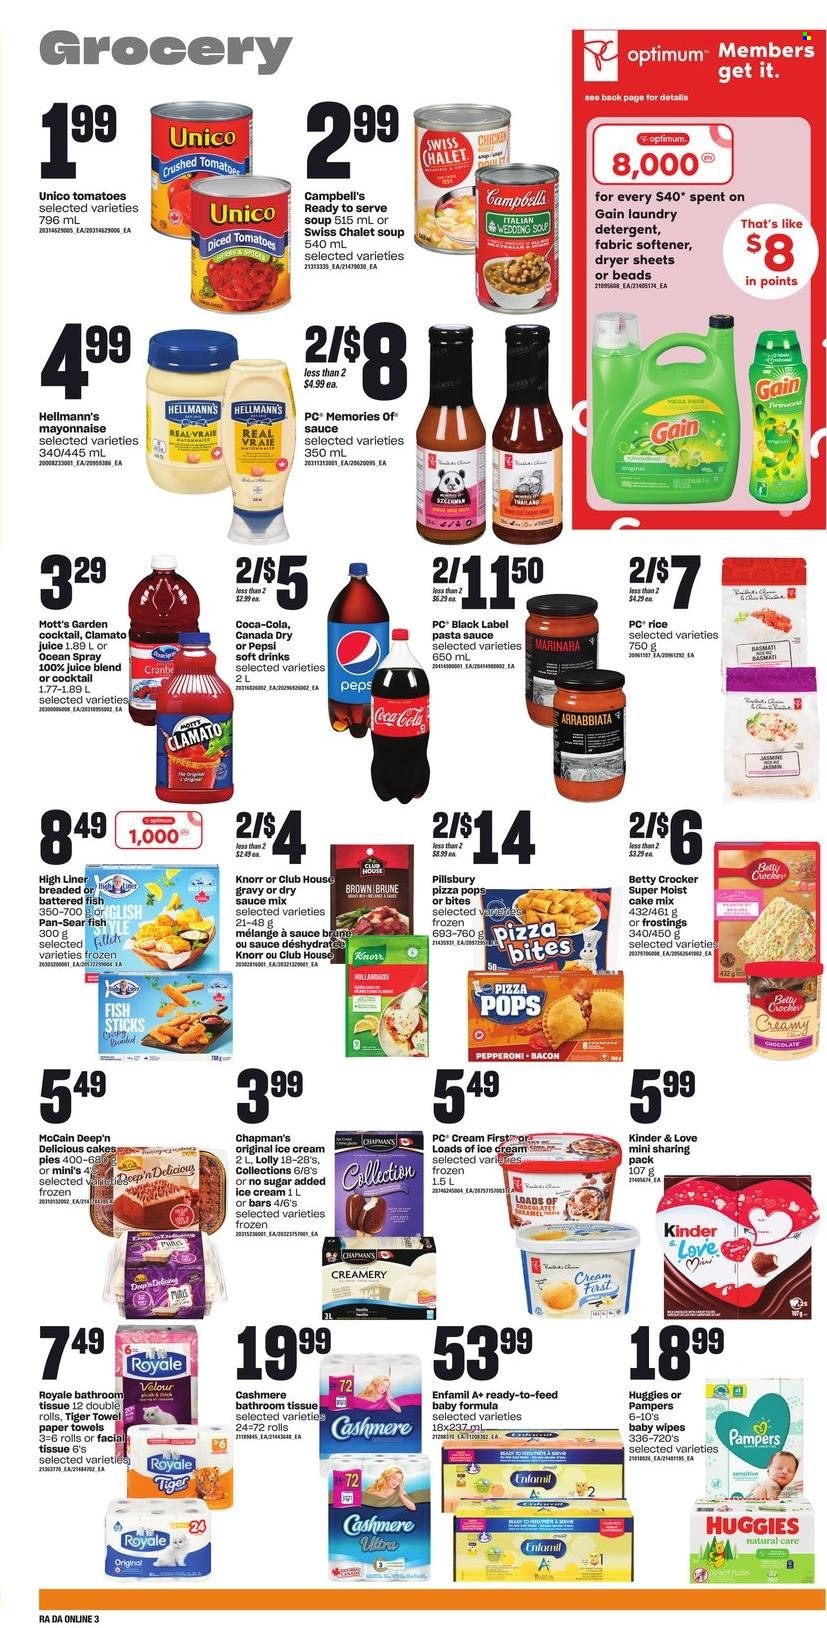 thumbnail - Dominion Flyer - February 02, 2023 - February 08, 2023 - Sales products - Sony, cake mix, Mott's, fish, fish fingers, fish sticks, Campbell's, pizza, pasta sauce, soup, sauce, Pillsbury, bacon, pepperoni, mayonnaise, Hellmann’s, ice cream, McCain, lollipop, crushed tomatoes, diced tomatoes, basmati rice, rice, Canada Dry, Coca-Cola, Pepsi, juice, Clamato, soft drink, Enfamil, wipes, Pampers, baby wipes, bath tissue, kitchen towels, paper towels, Gain, fabric softener, laundry detergent, dryer sheets, pan, Optimum, detergent, Huggies, Knorr. Page 9.